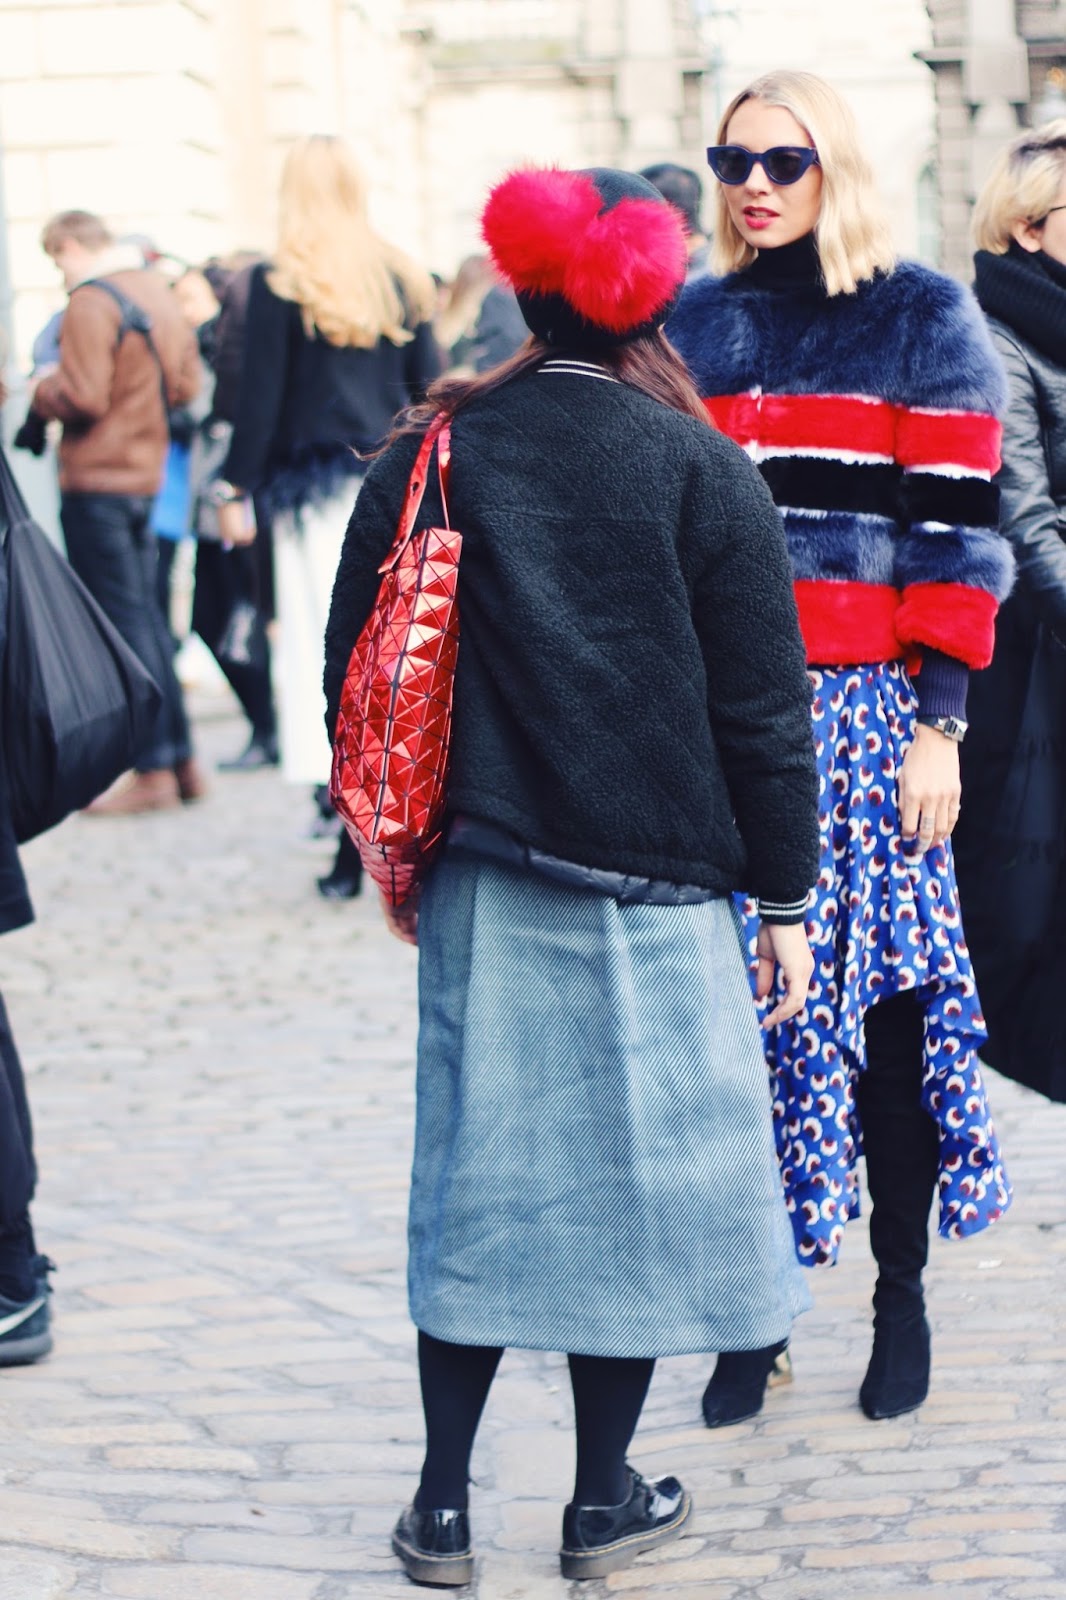 On the street for Oxford Fashion Week | The Sassy Street